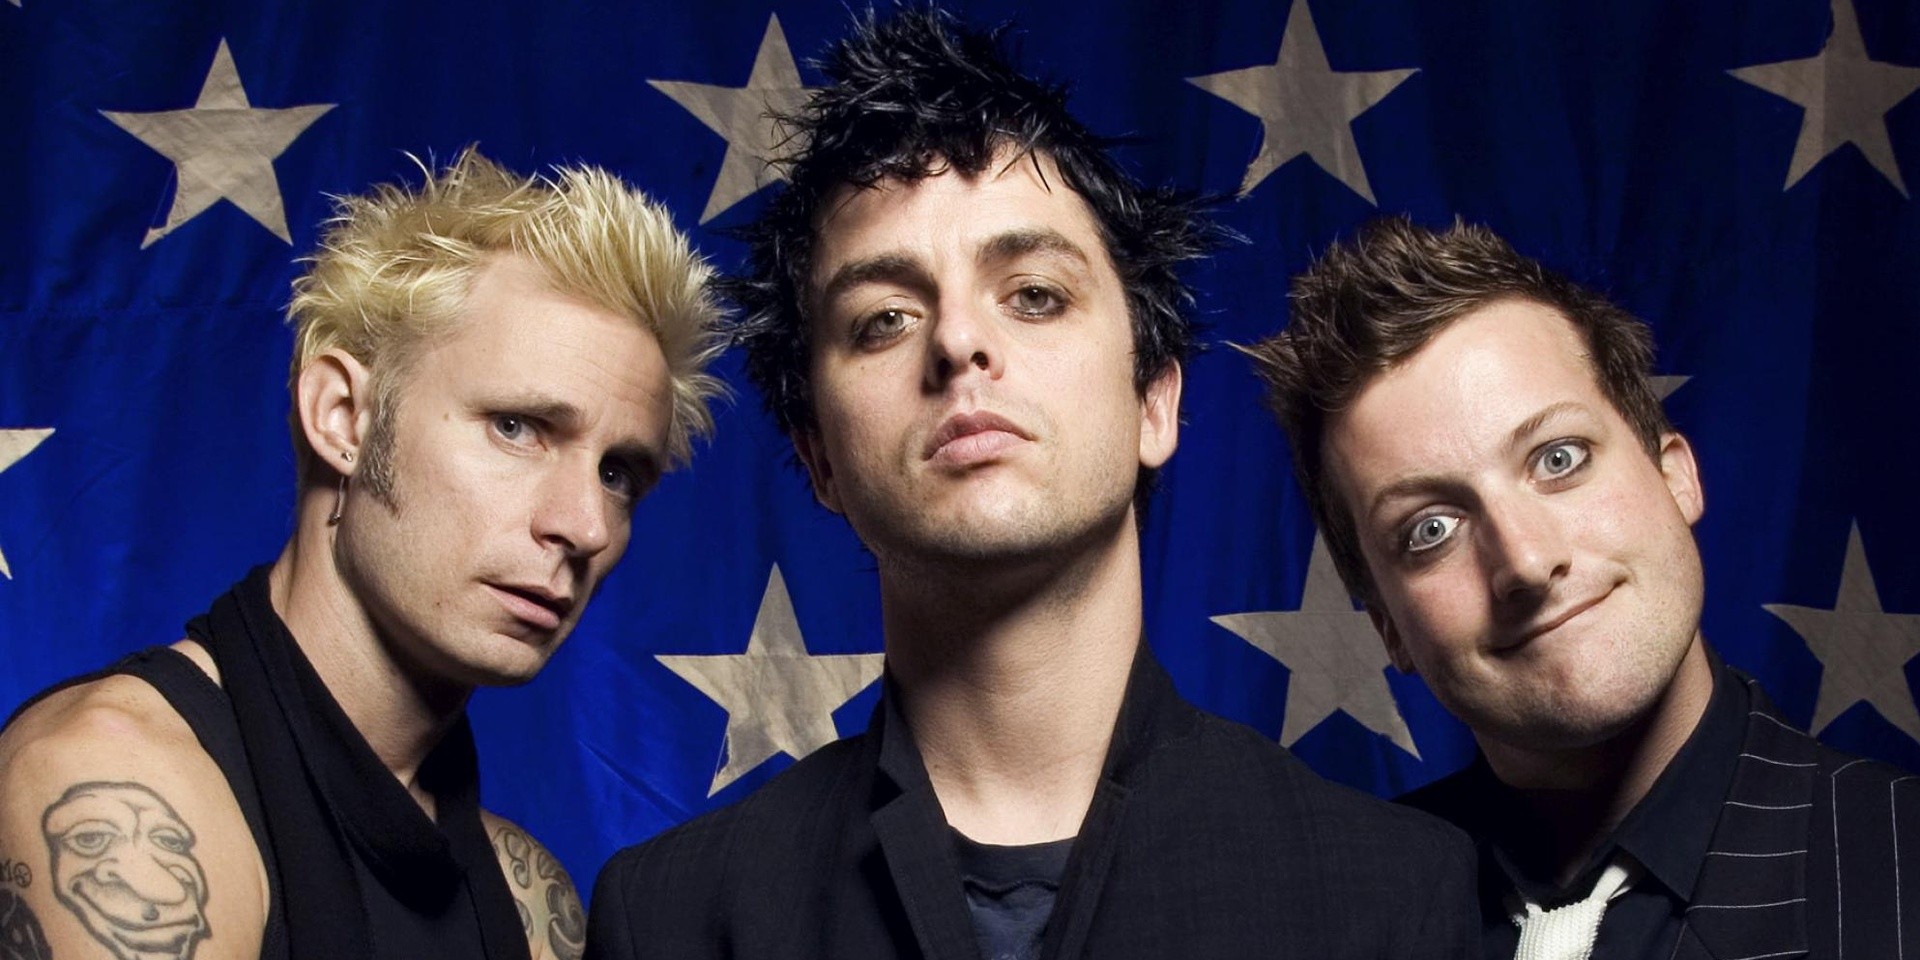 GREEN DAY announces Asia tour – shows in Singapore, Manila, Hong Kong and more confirmed